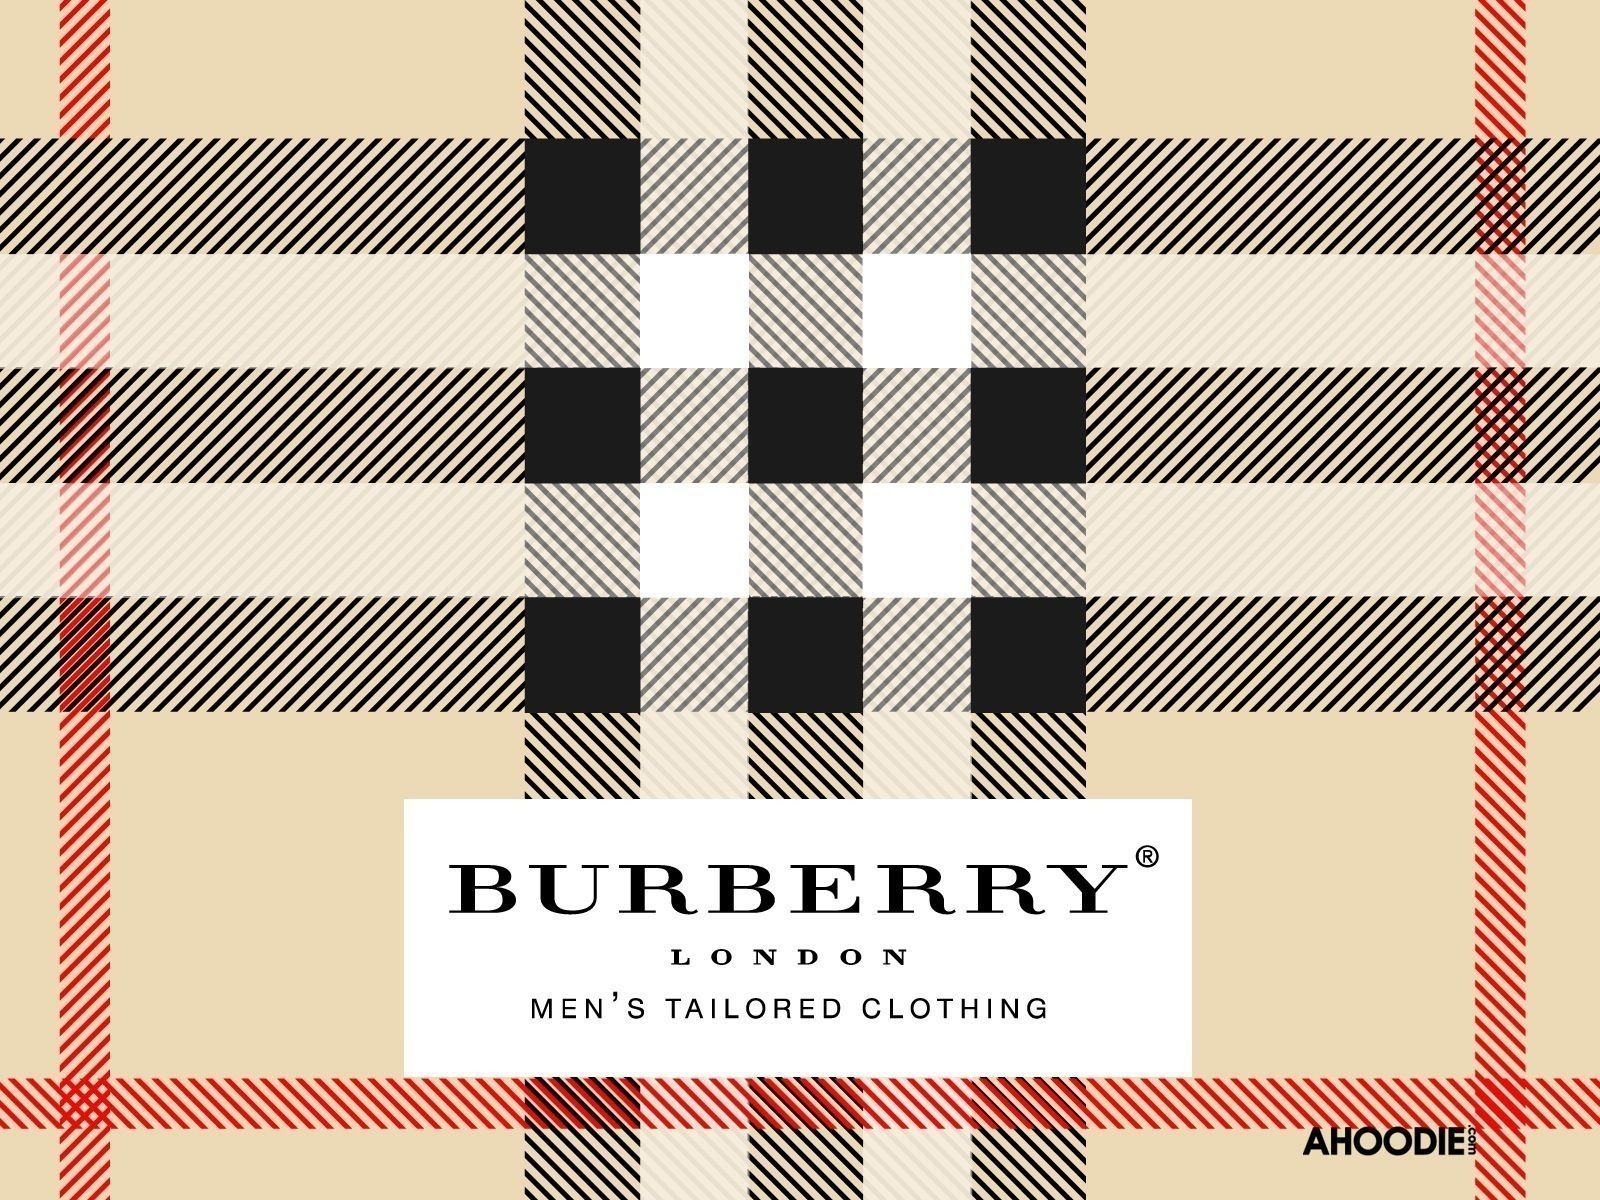 Burberry joins with two youth-based causes